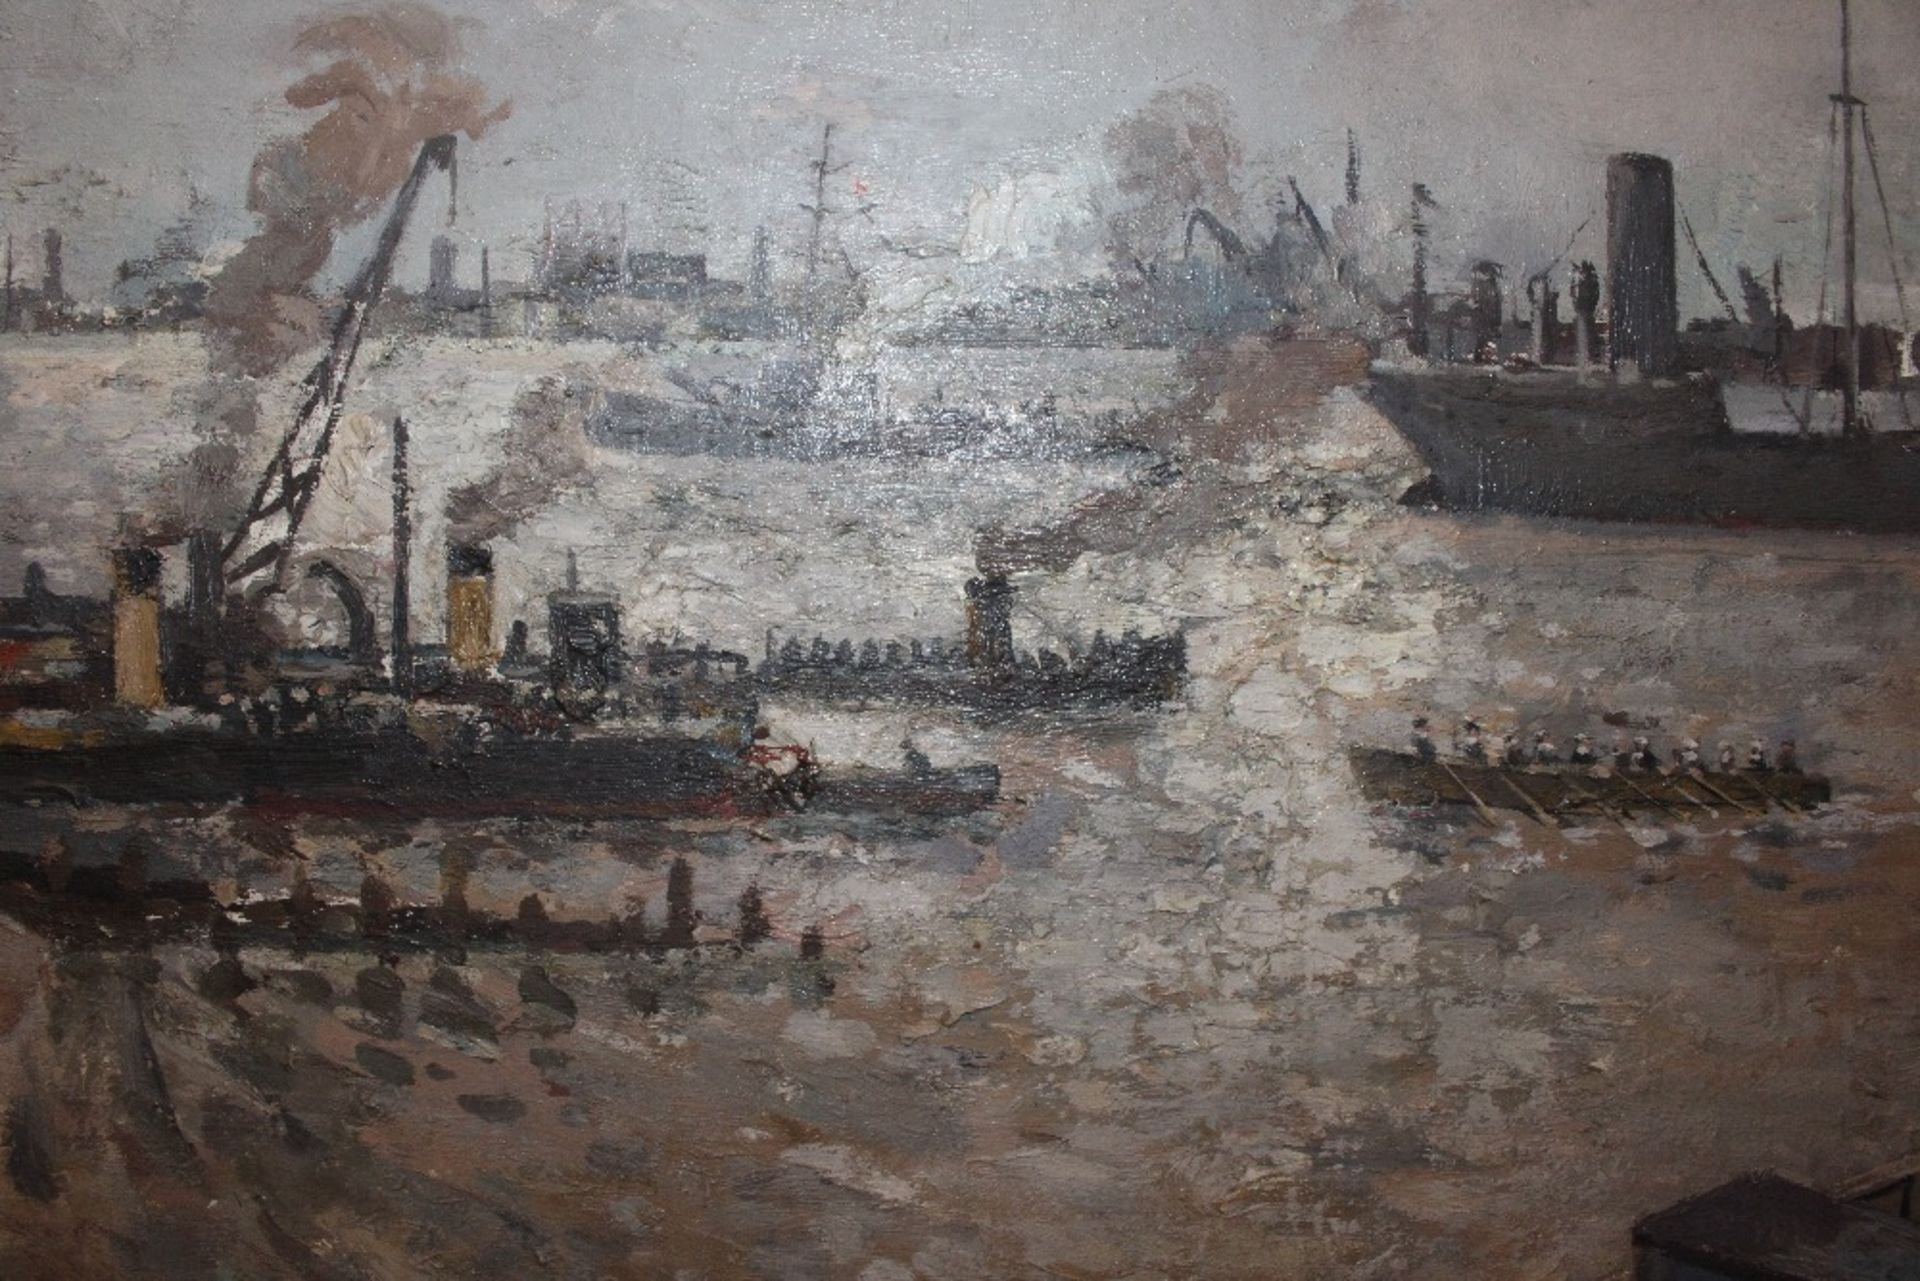 Allan Walton 1891-1948, study of a busy naval port with vessels and sailors, signed oil on canvas, - Image 13 of 15